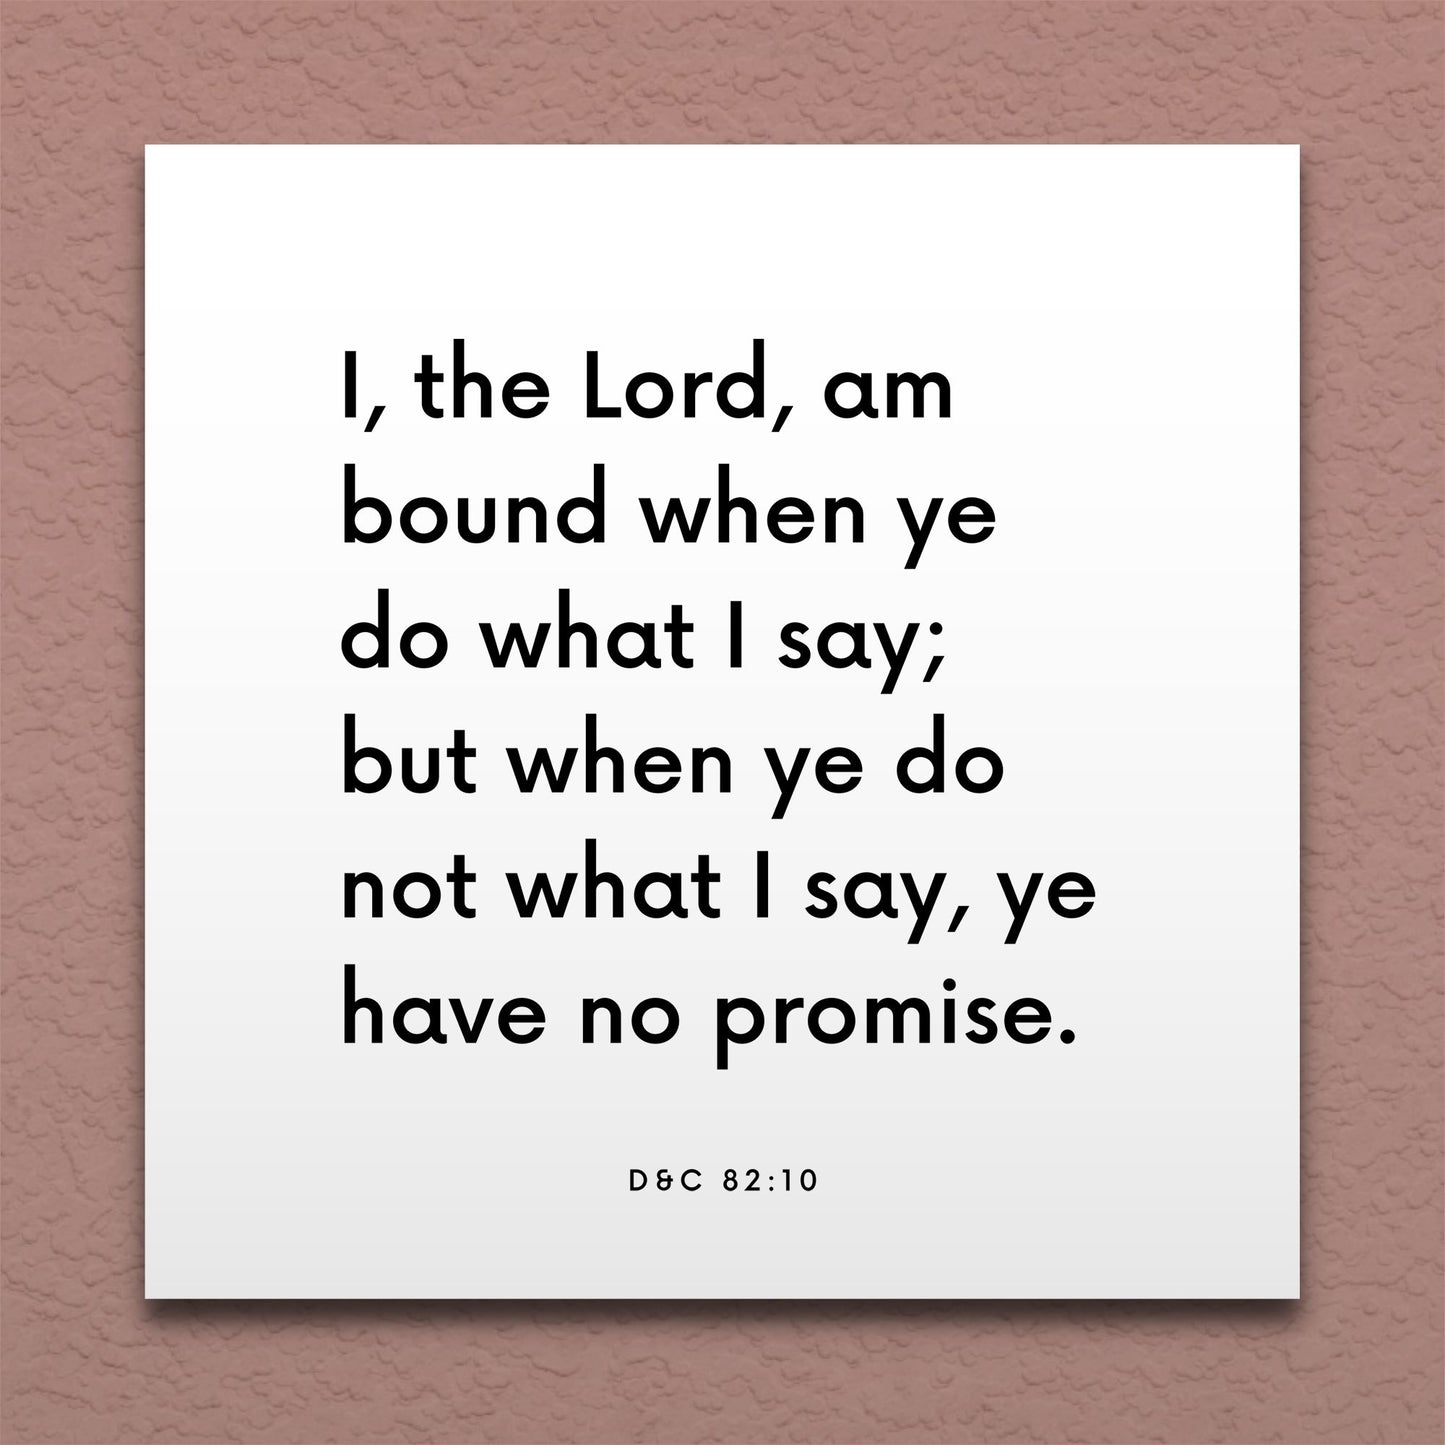 Wall-mounted scripture tile for D&C 82:10 - "I, the Lord, am bound when ye do what I say"